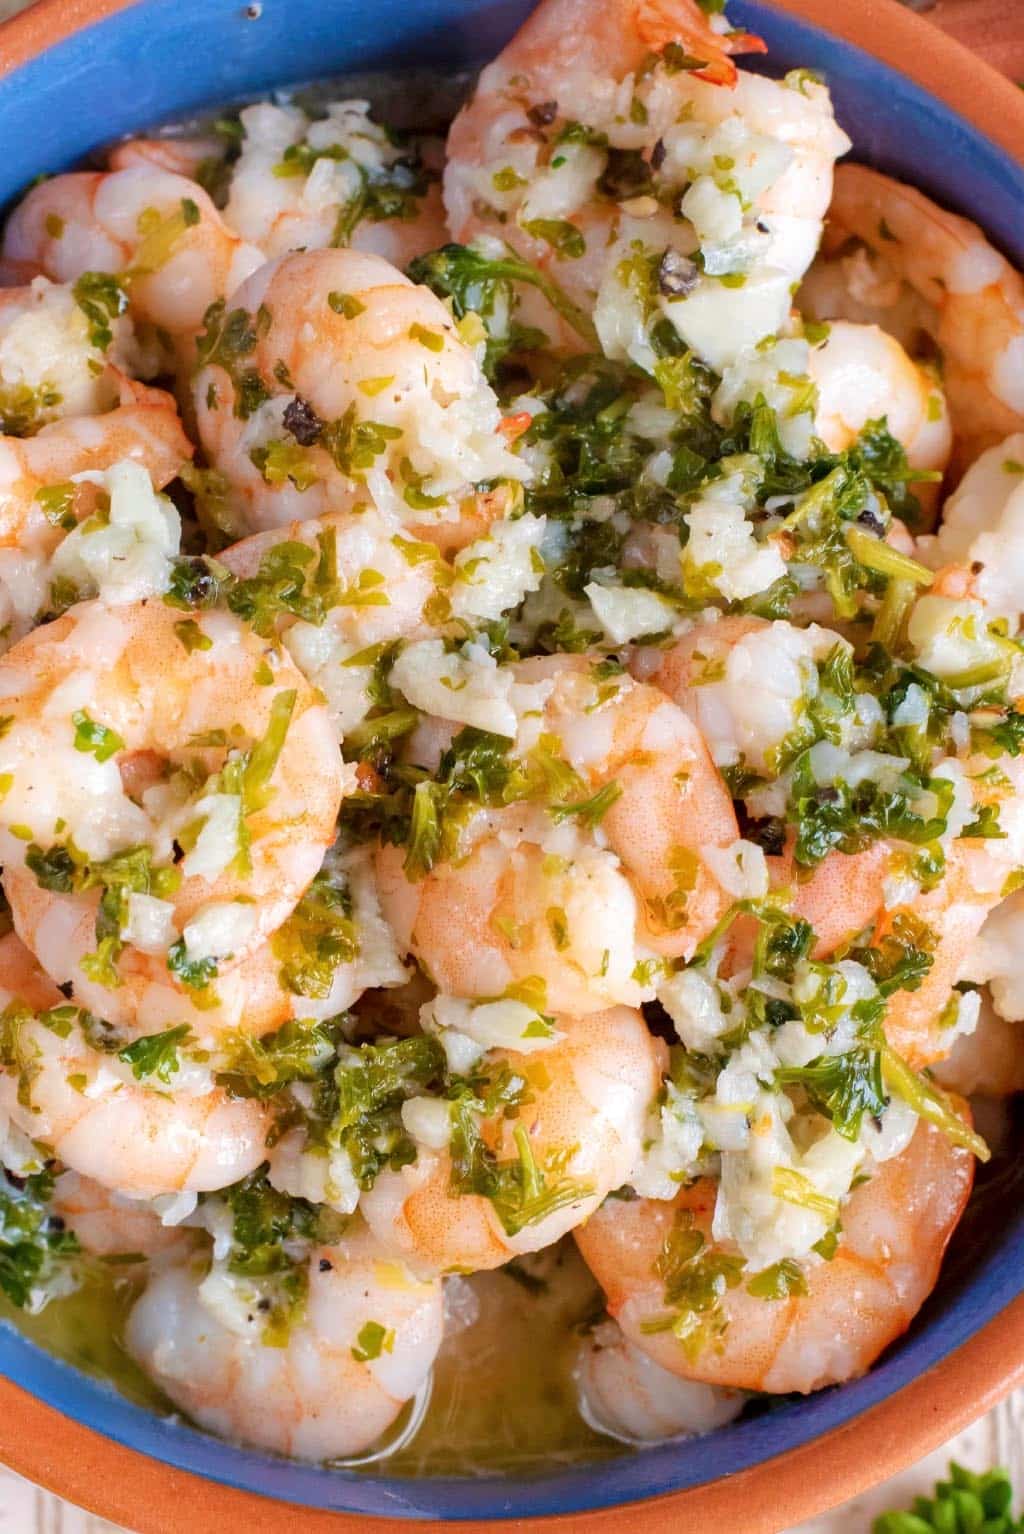 Cooked shrimp in a bowl covered in garlic and chopped herbs.